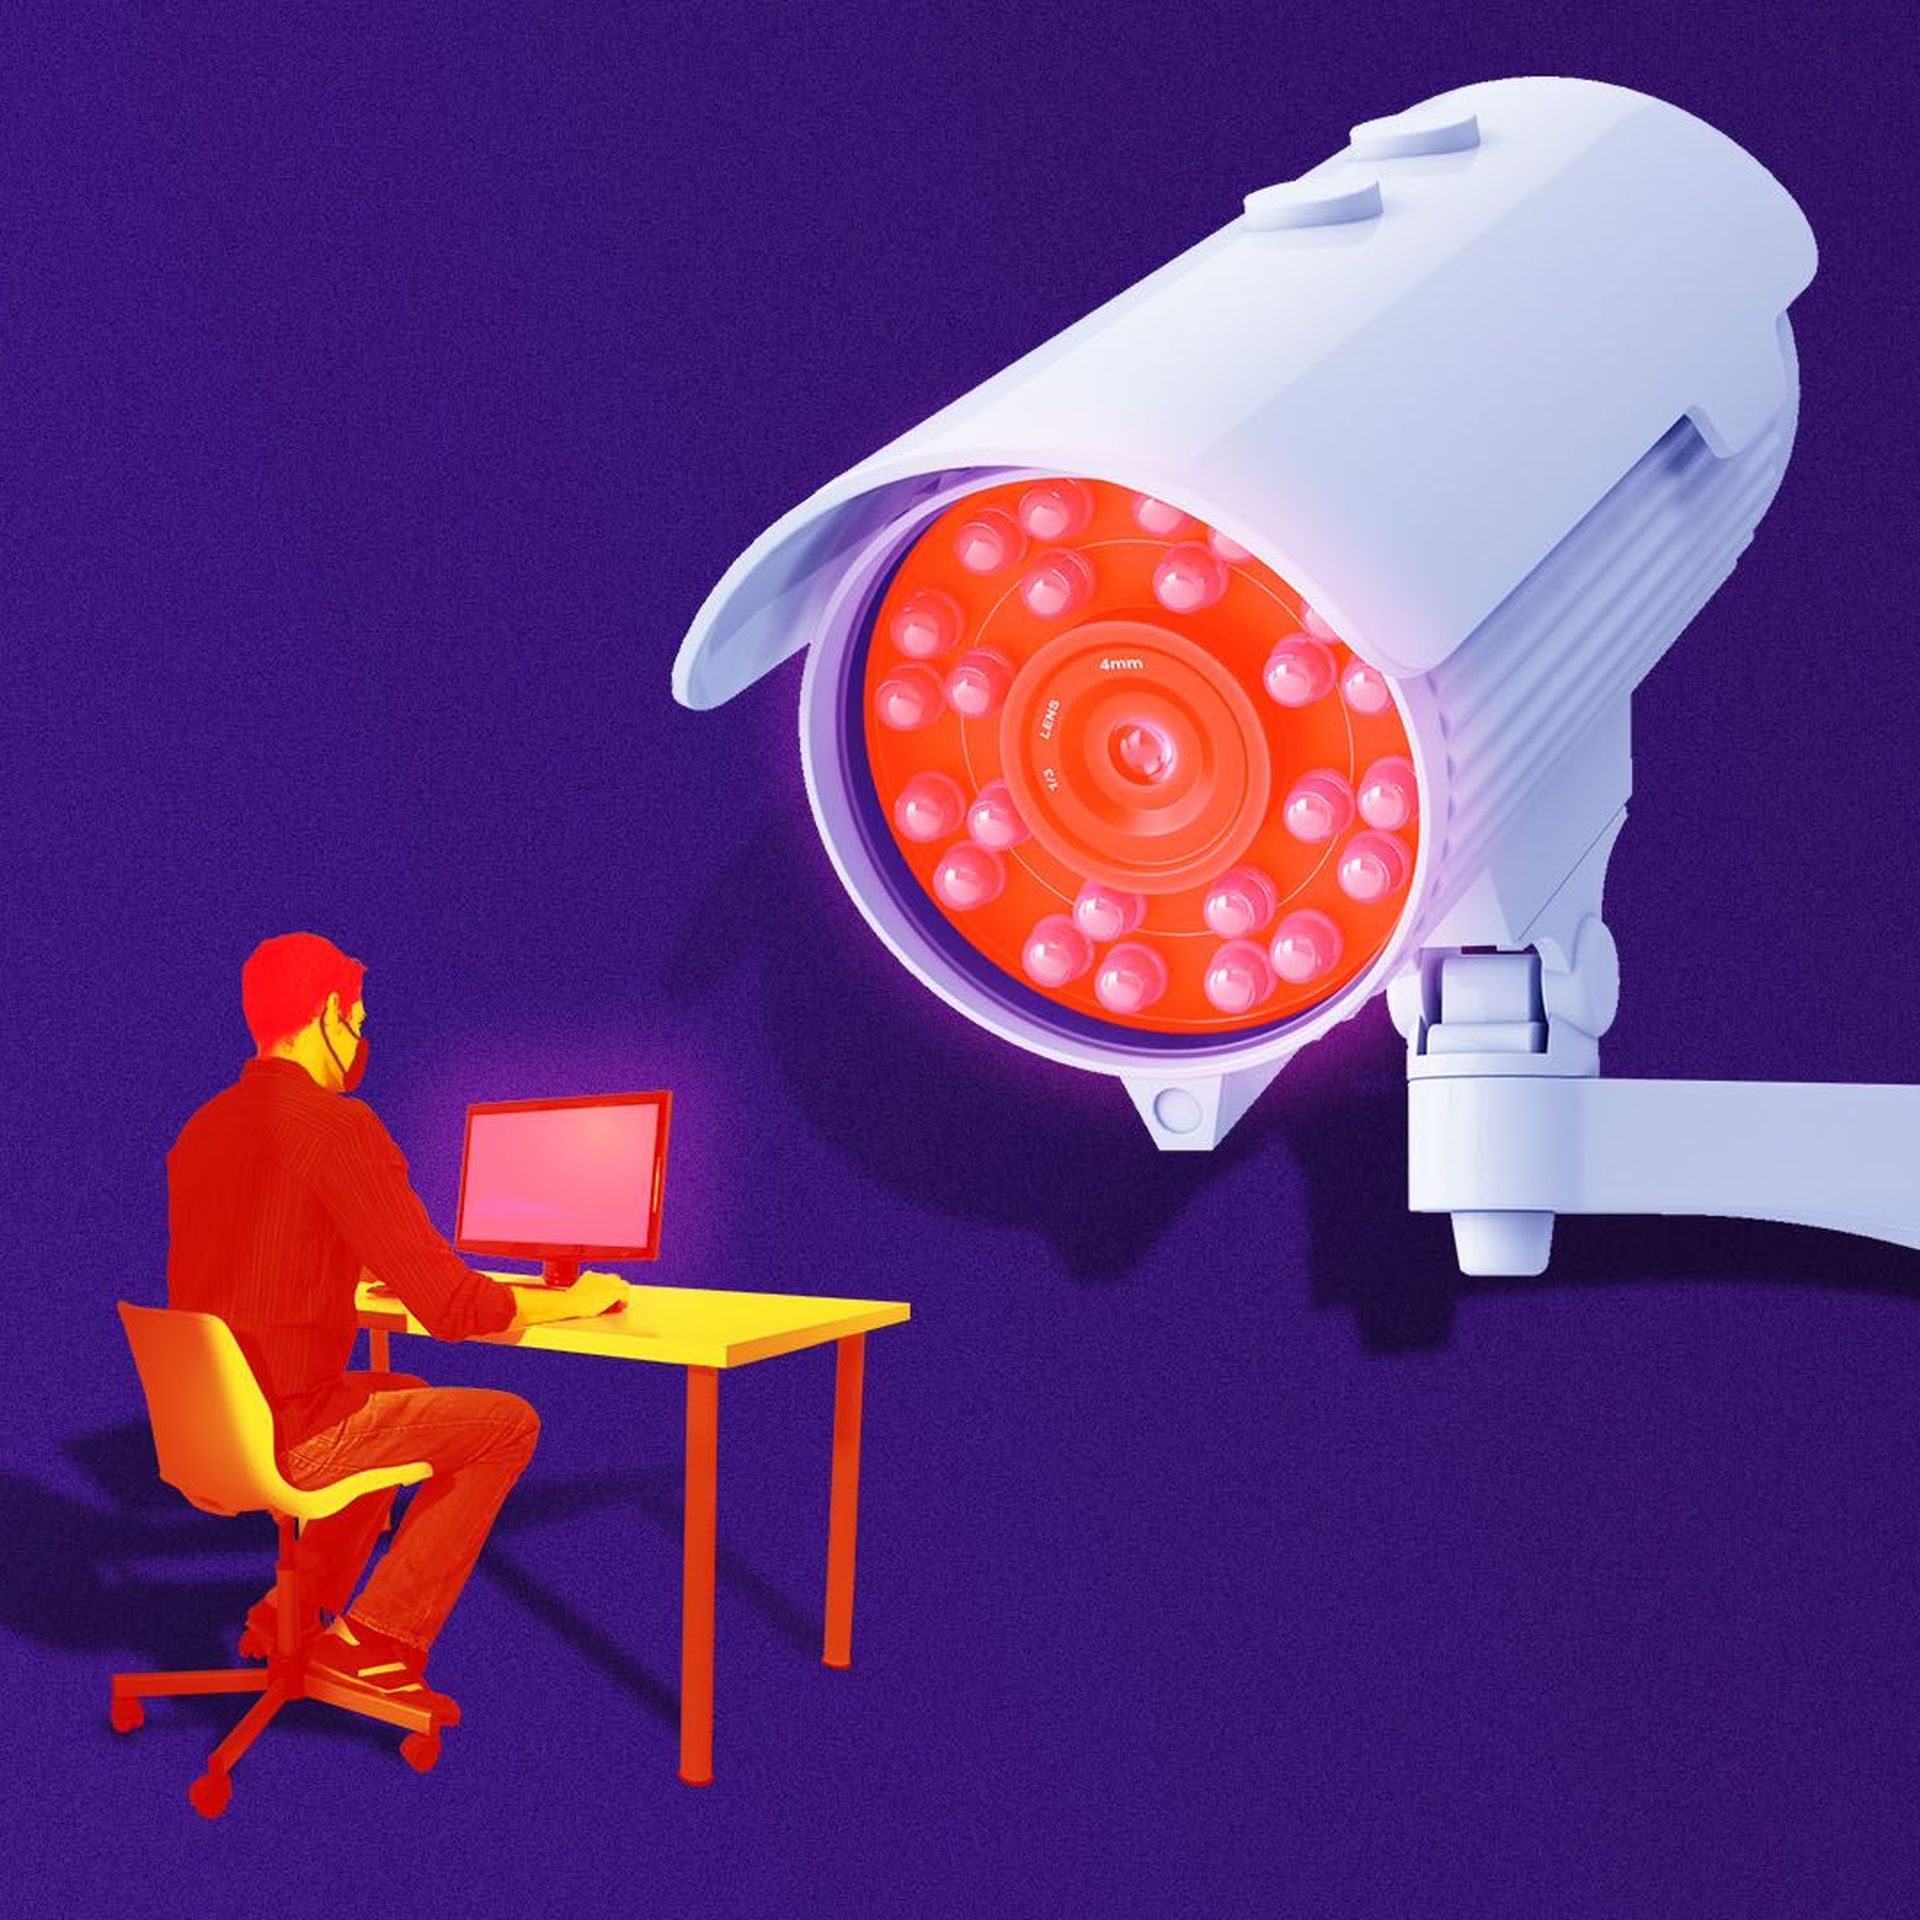 Illustration of a person sitting at a computer desk with a giant infrared camera taking their temperature 